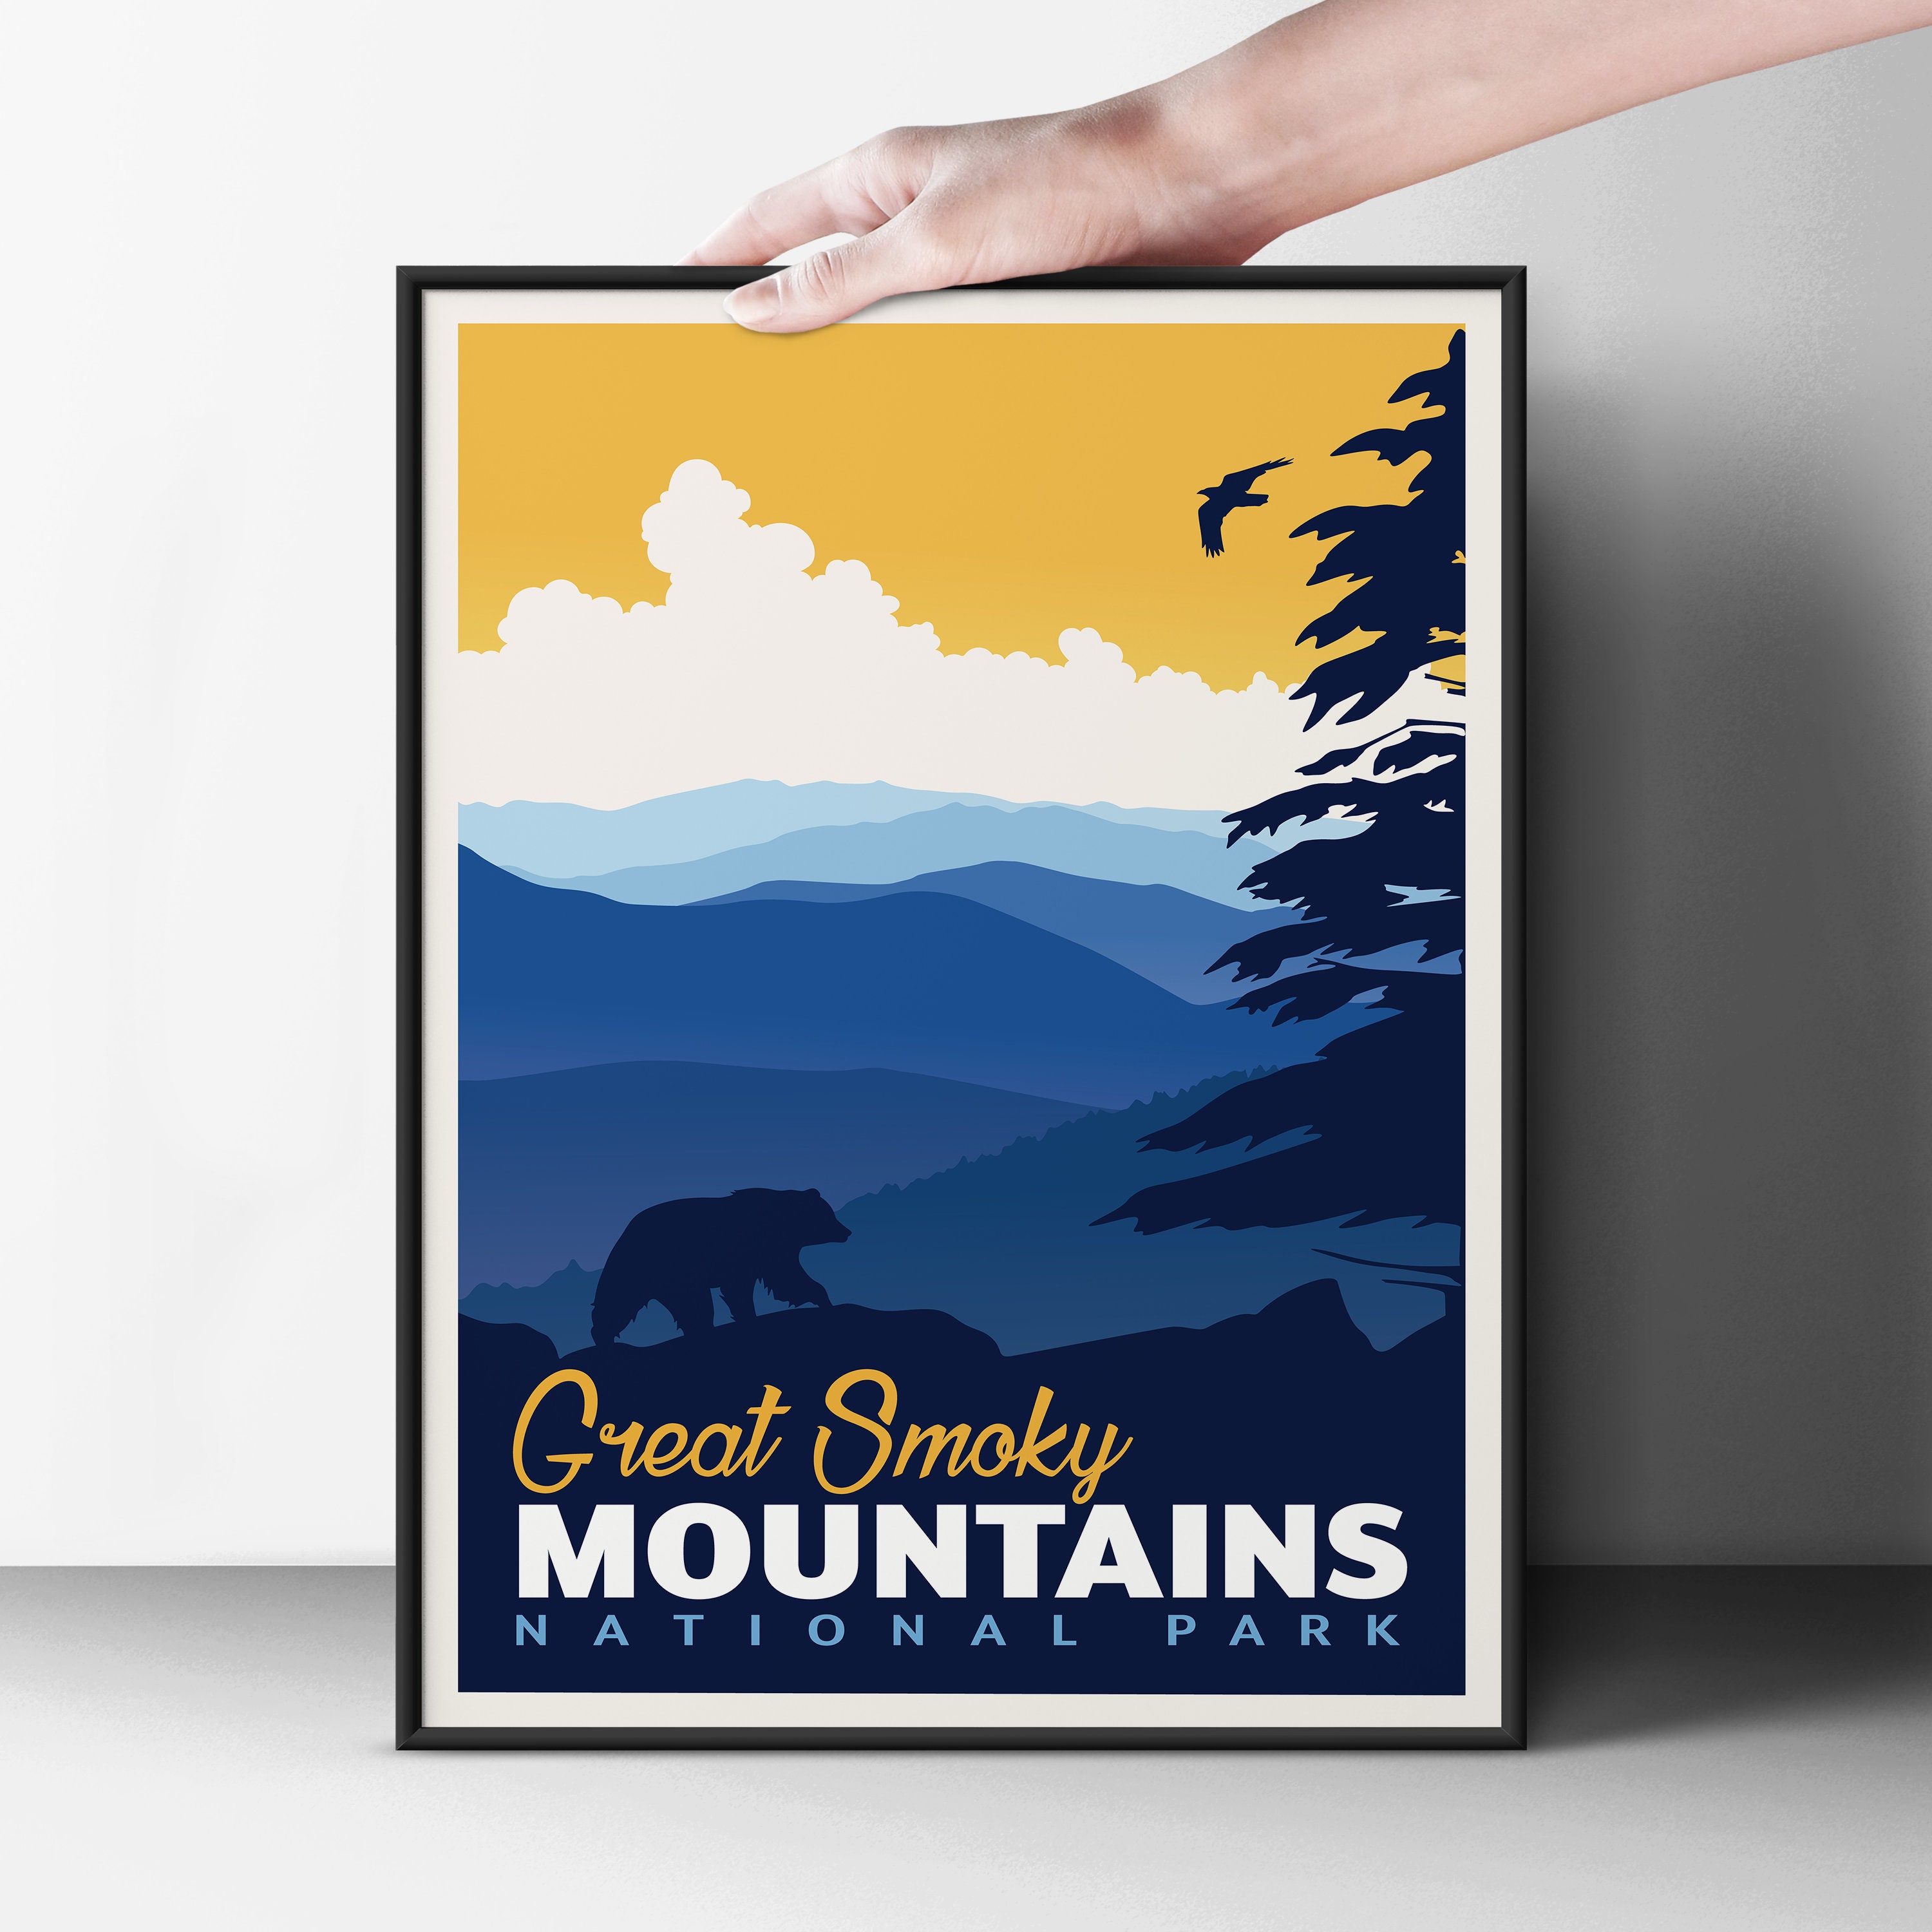 Great Smoky Mountains National Park Travel Poster Minimalist | Etsy